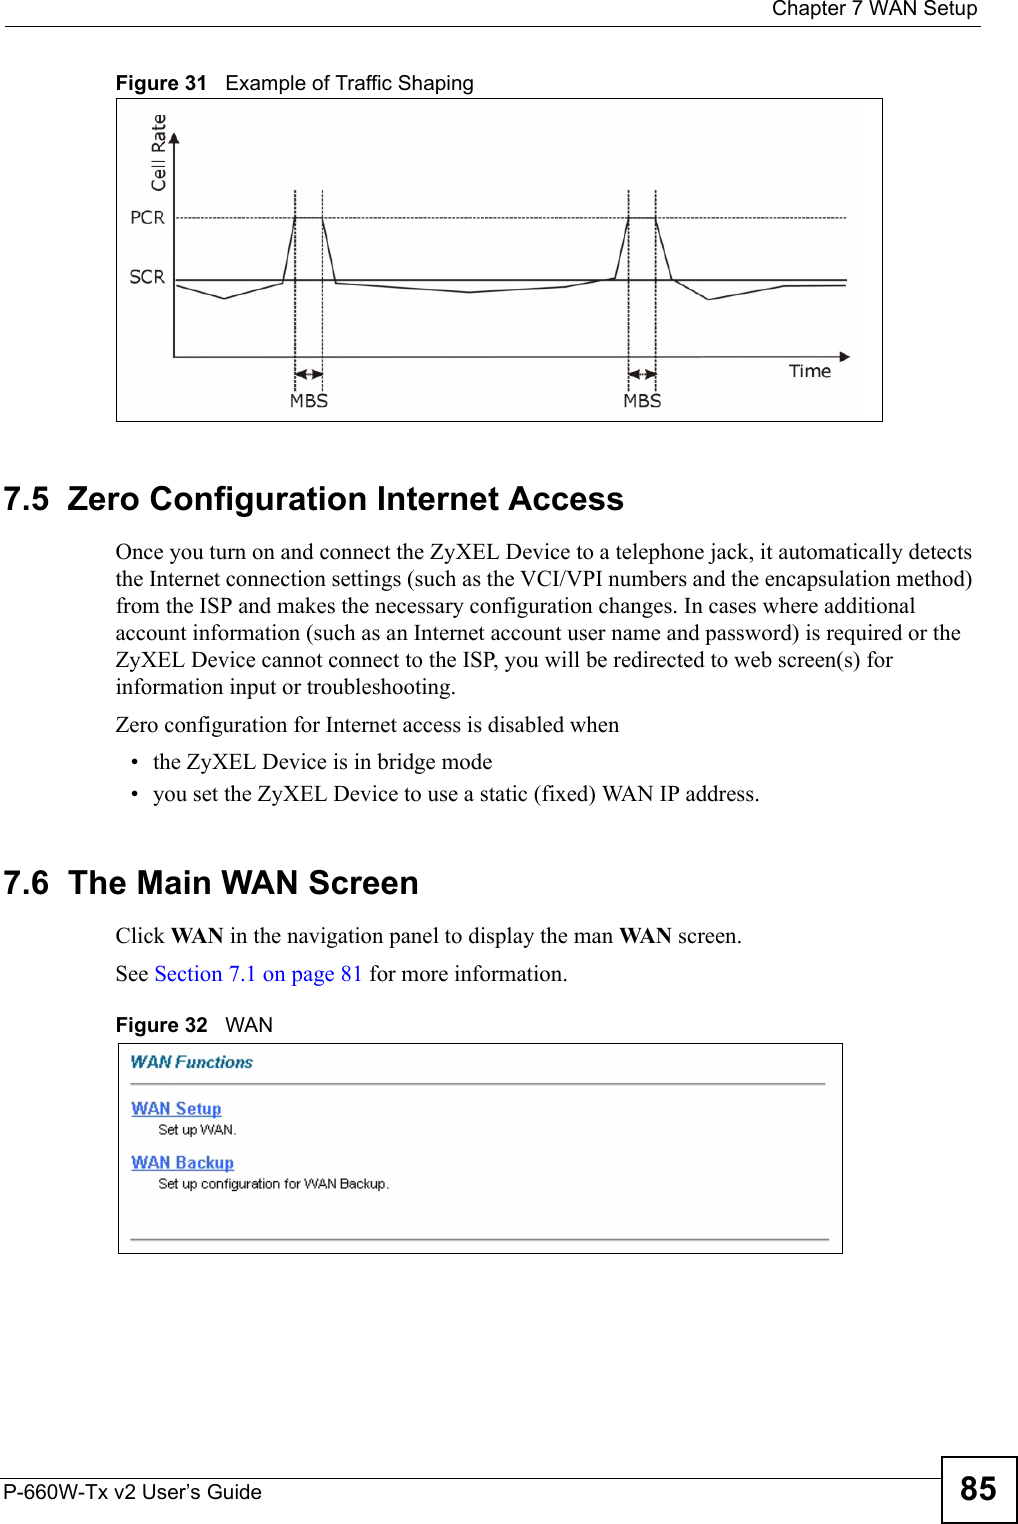  Chapter 7 WAN SetupP-660W-Tx v2 User’s Guide 85Figure 31   Example of Traffic Shaping7.5  Zero Configuration Internet AccessOnce you turn on and connect the ZyXEL Device to a telephone jack, it automatically detects the Internet connection settings (such as the VCI/VPI numbers and the encapsulation method) from the ISP and makes the necessary configuration changes. In cases where additional account information (such as an Internet account user name and password) is required or the ZyXEL Device cannot connect to the ISP, you will be redirected to web screen(s) for information input or troubleshooting.Zero configuration for Internet access is disabled when • the ZyXEL Device is in bridge mode• you set the ZyXEL Device to use a static (fixed) WAN IP address. 7.6  The Main WAN Screen Click WA N  in the navigation panel to display the man WA N  screen. See Section 7.1 on page 81 for more information. Figure 32   WAN 